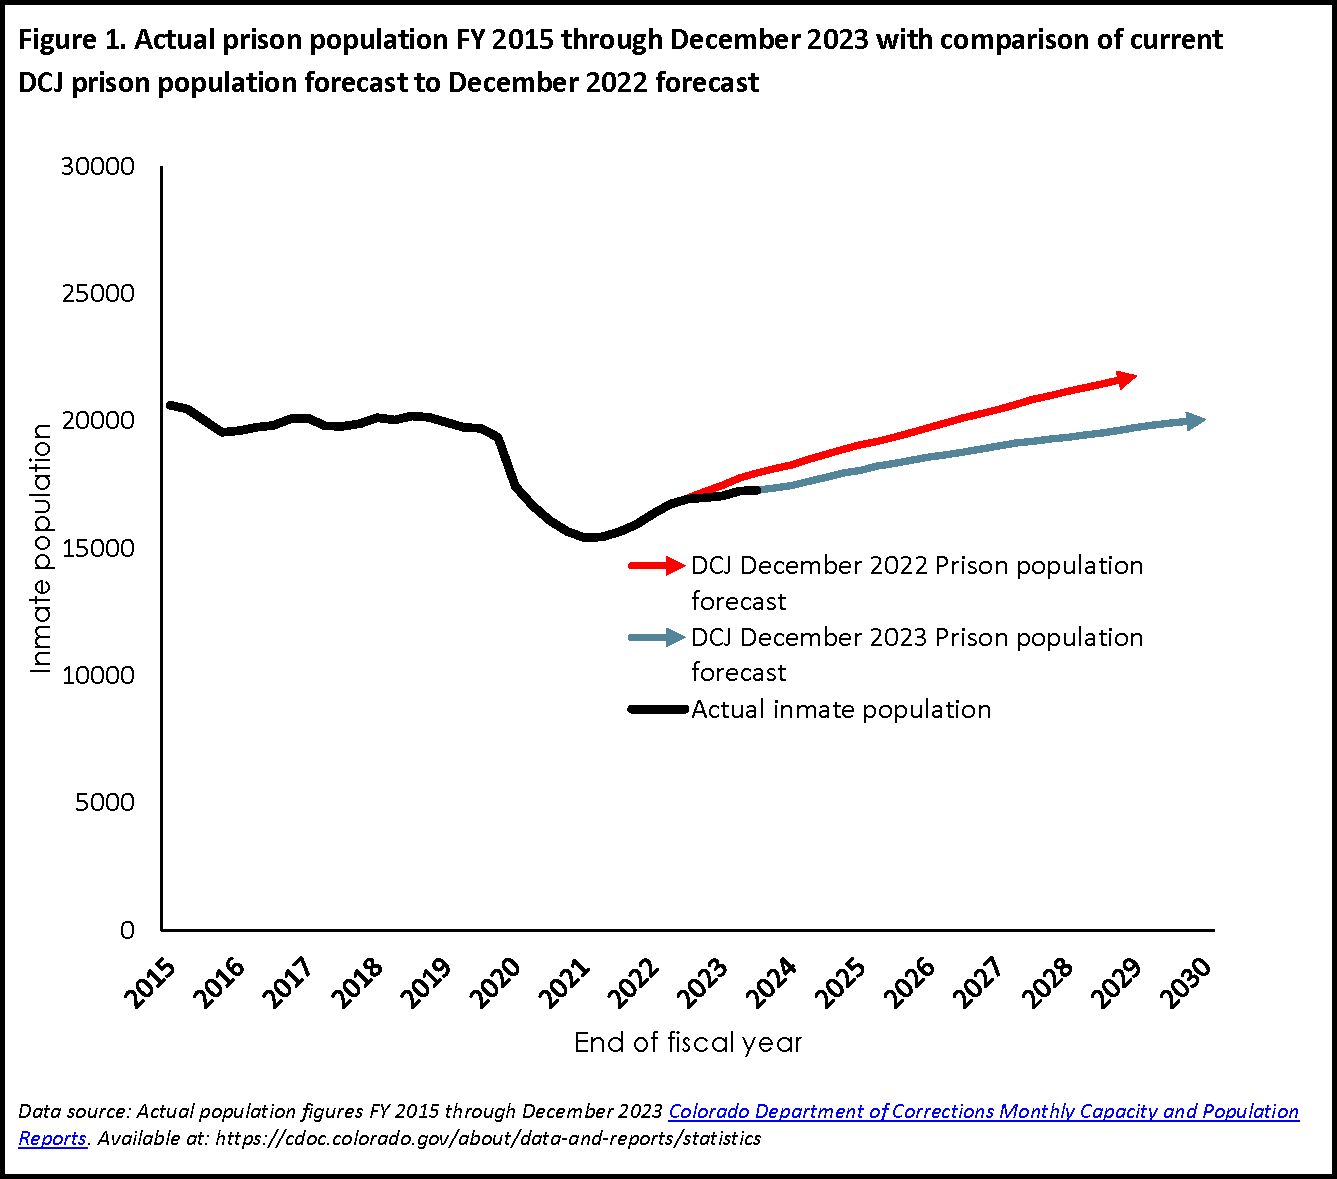 Fig 1: Actual Prison Populations FY 2015 through December 2023 with comparisons of 2022 and 2023 Forecasts